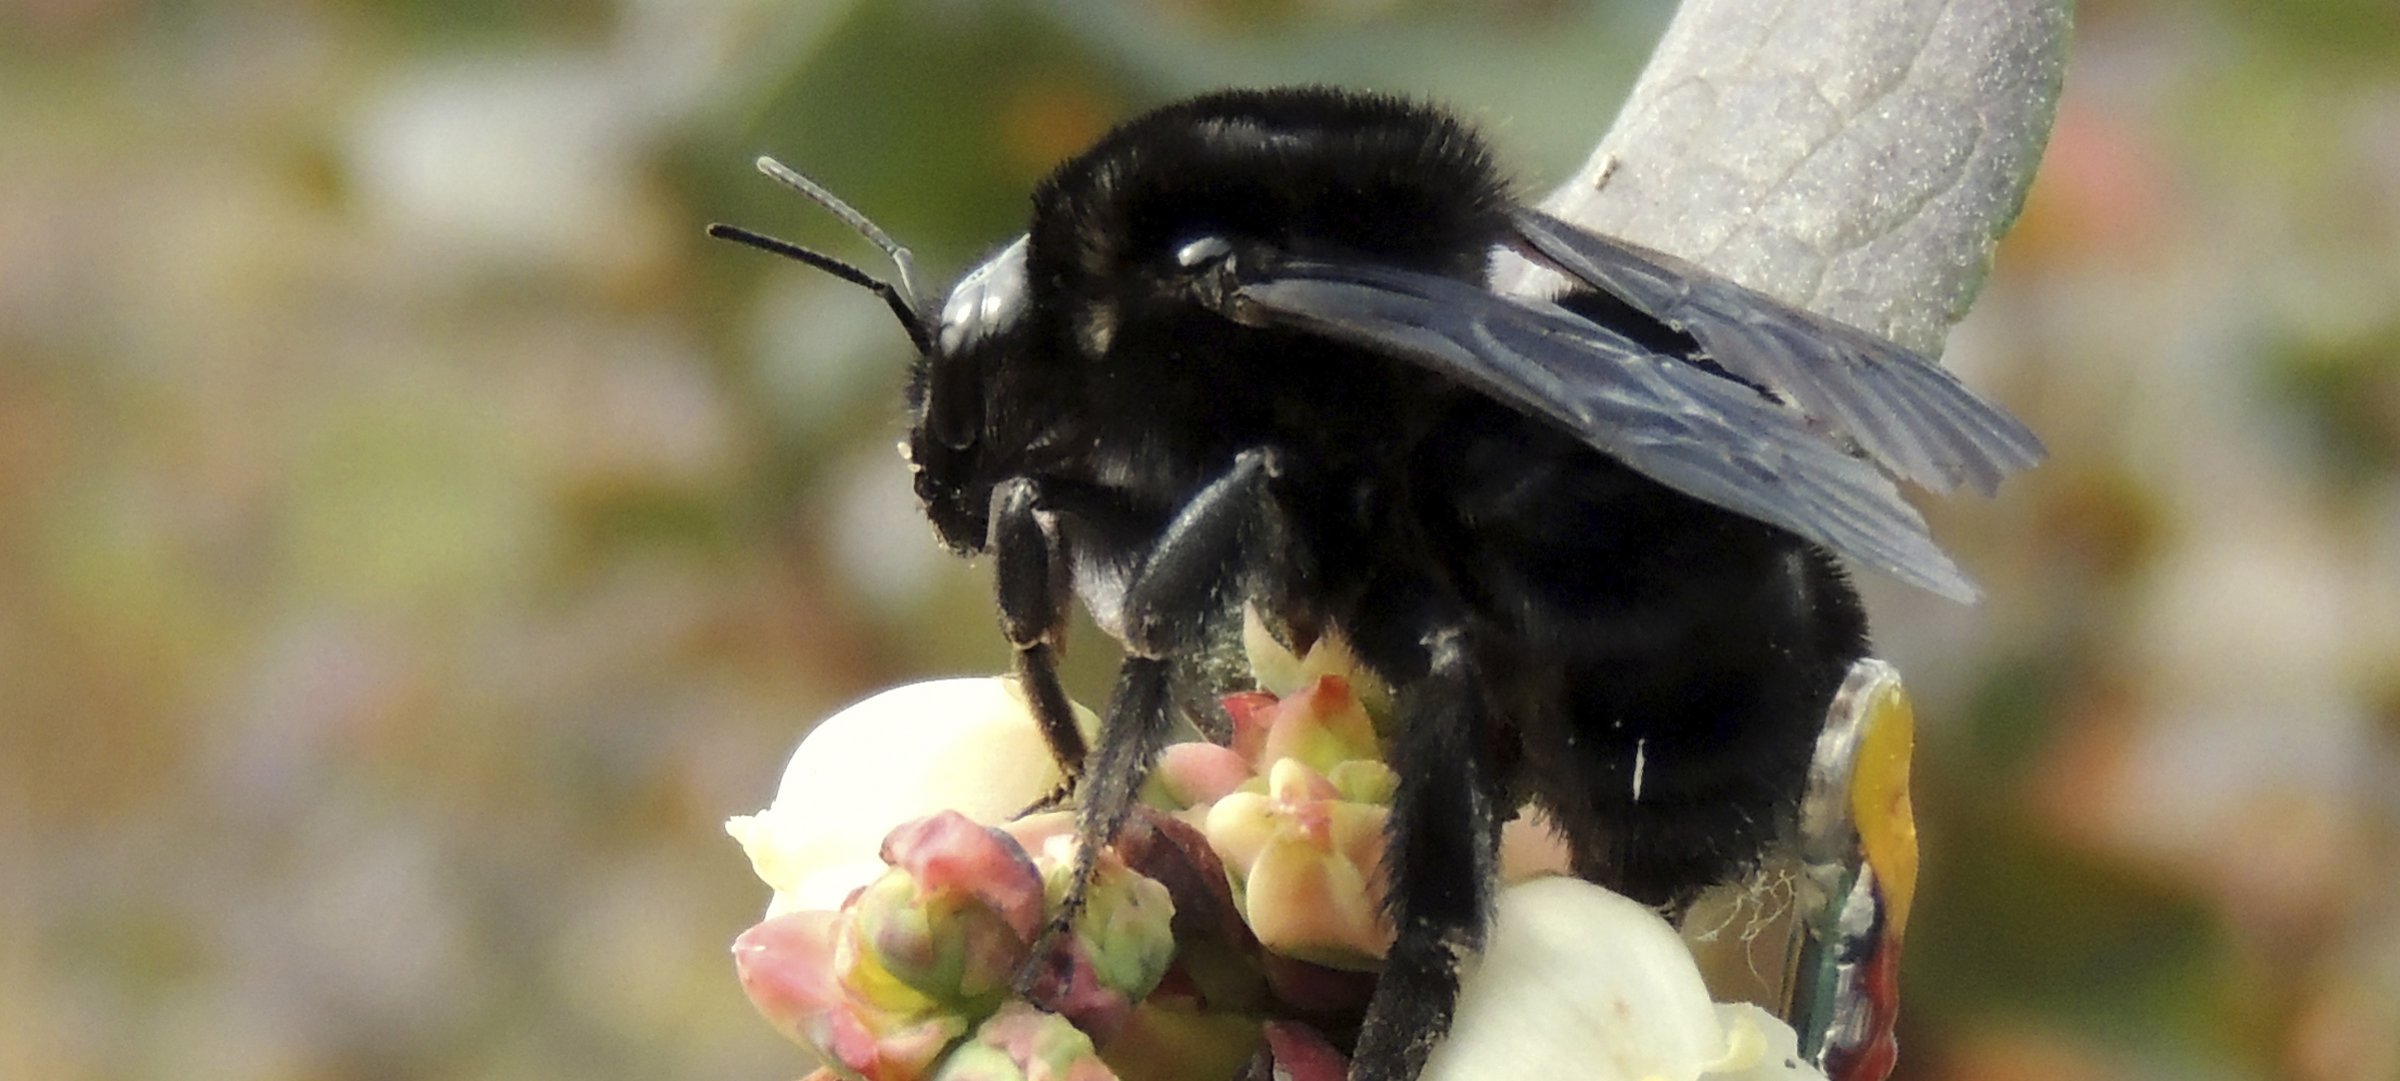 A queen bumblebee with a small transmitter attached to its abdomen on a blueberry
      blossom in Argentina outside with a blurred background of a blueberry field in early
      summer.